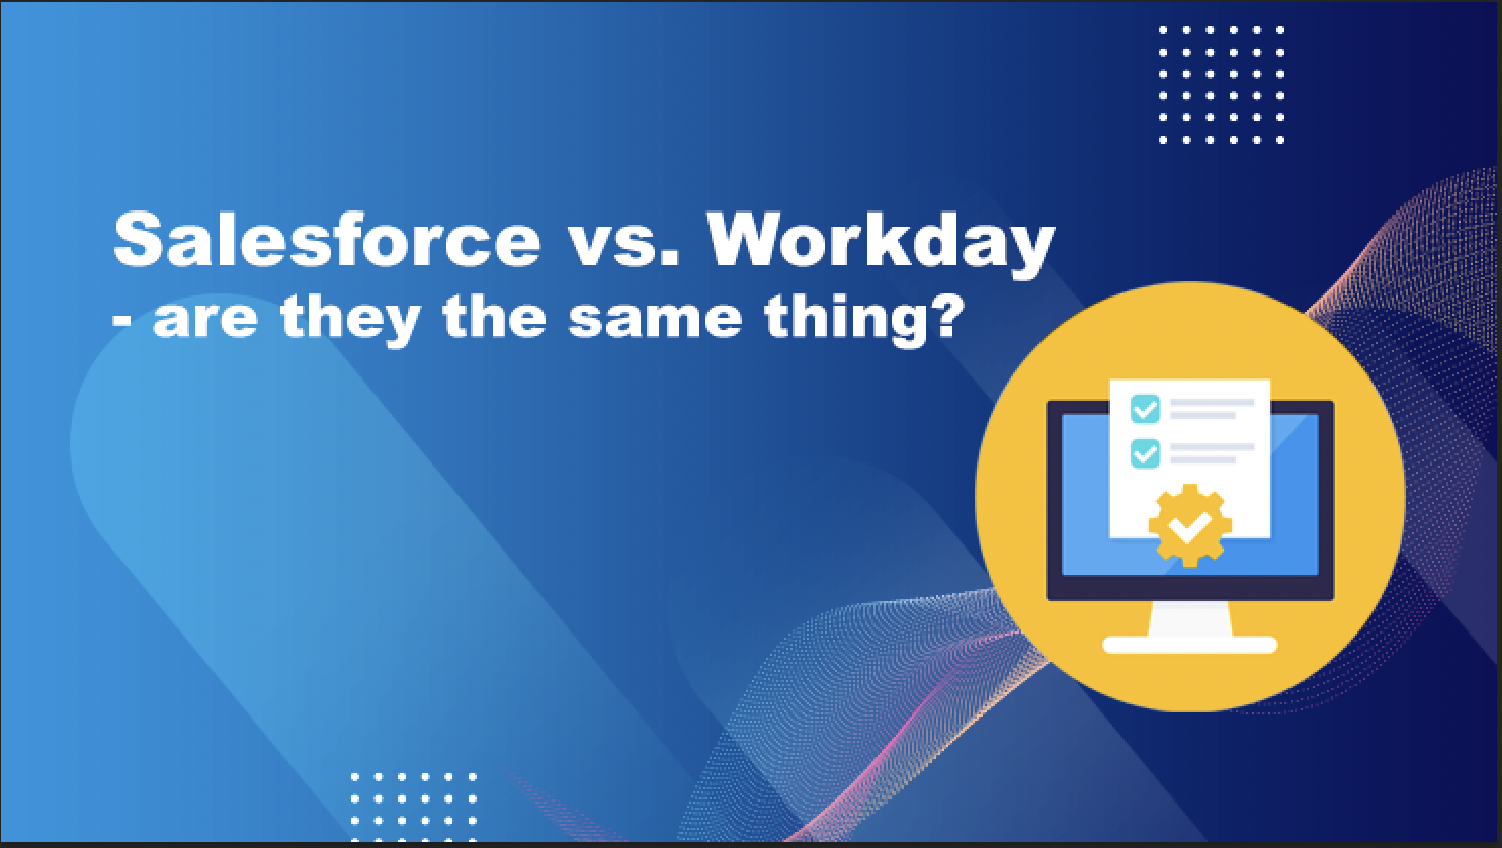 Salesforce vs. Workday - are they the same thing?